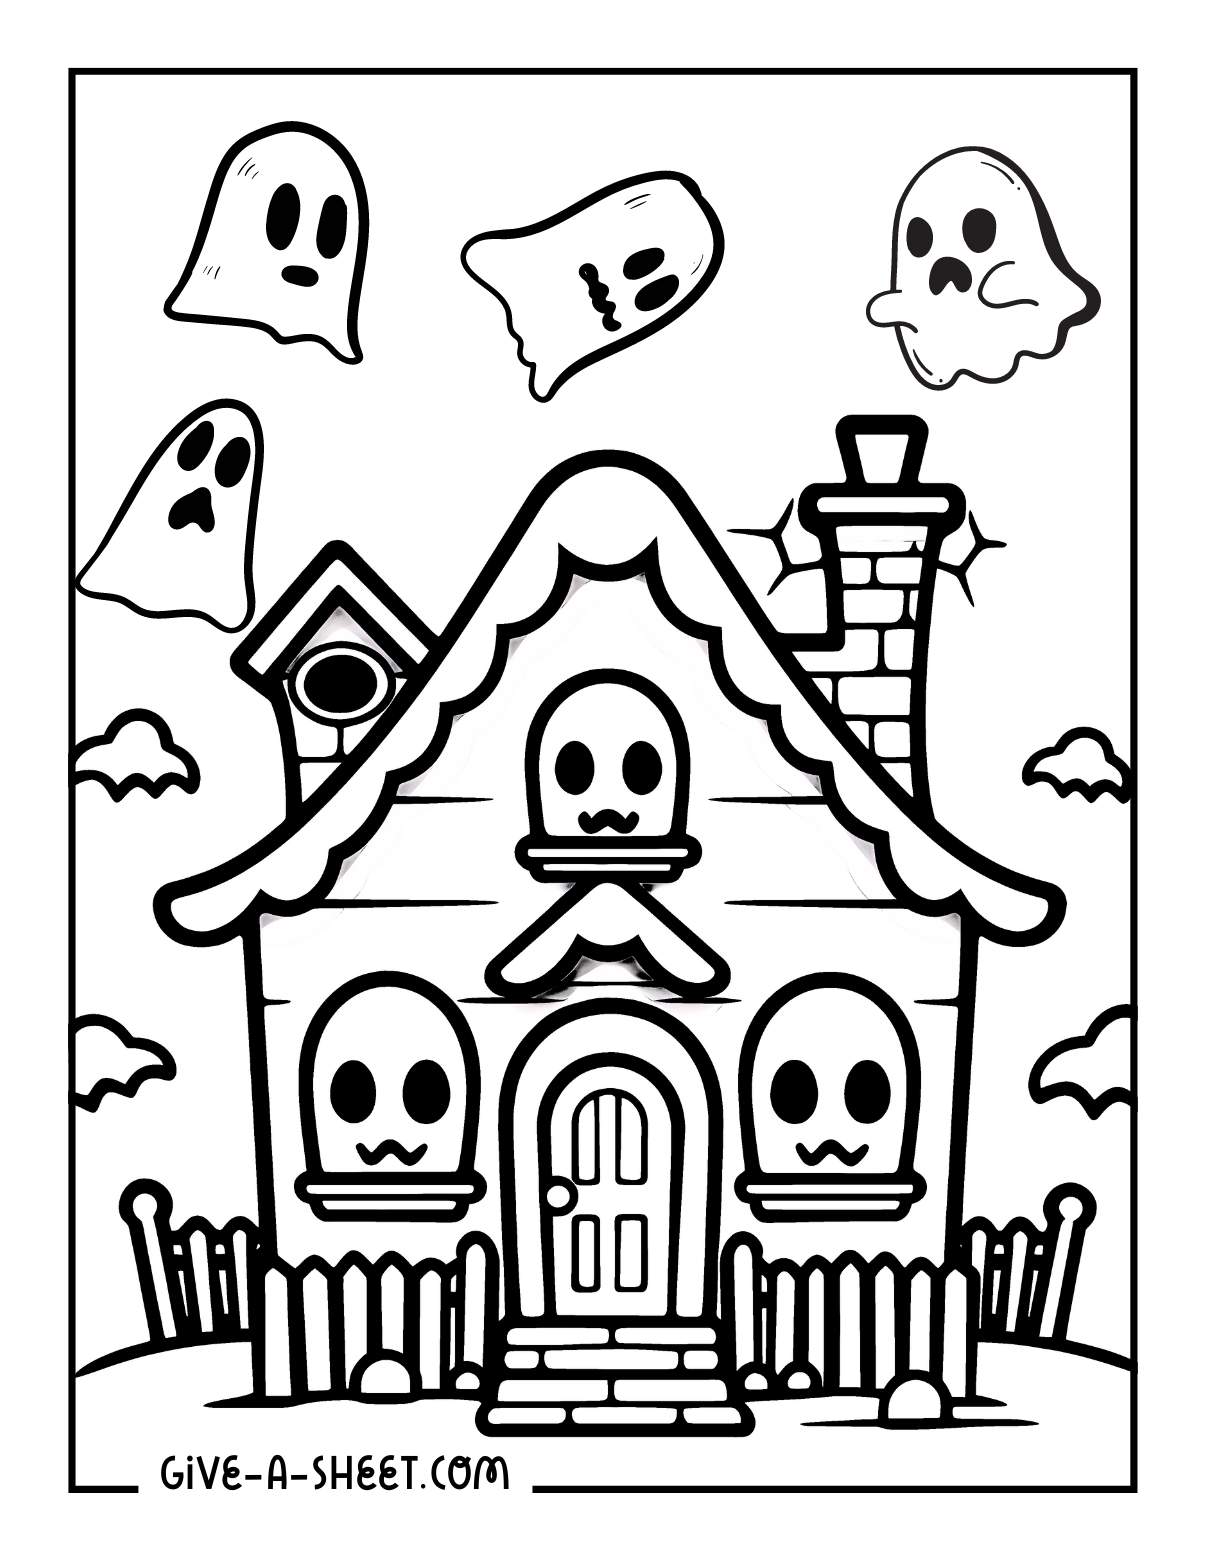 Haunted houses with ghost coloring pages for kids.